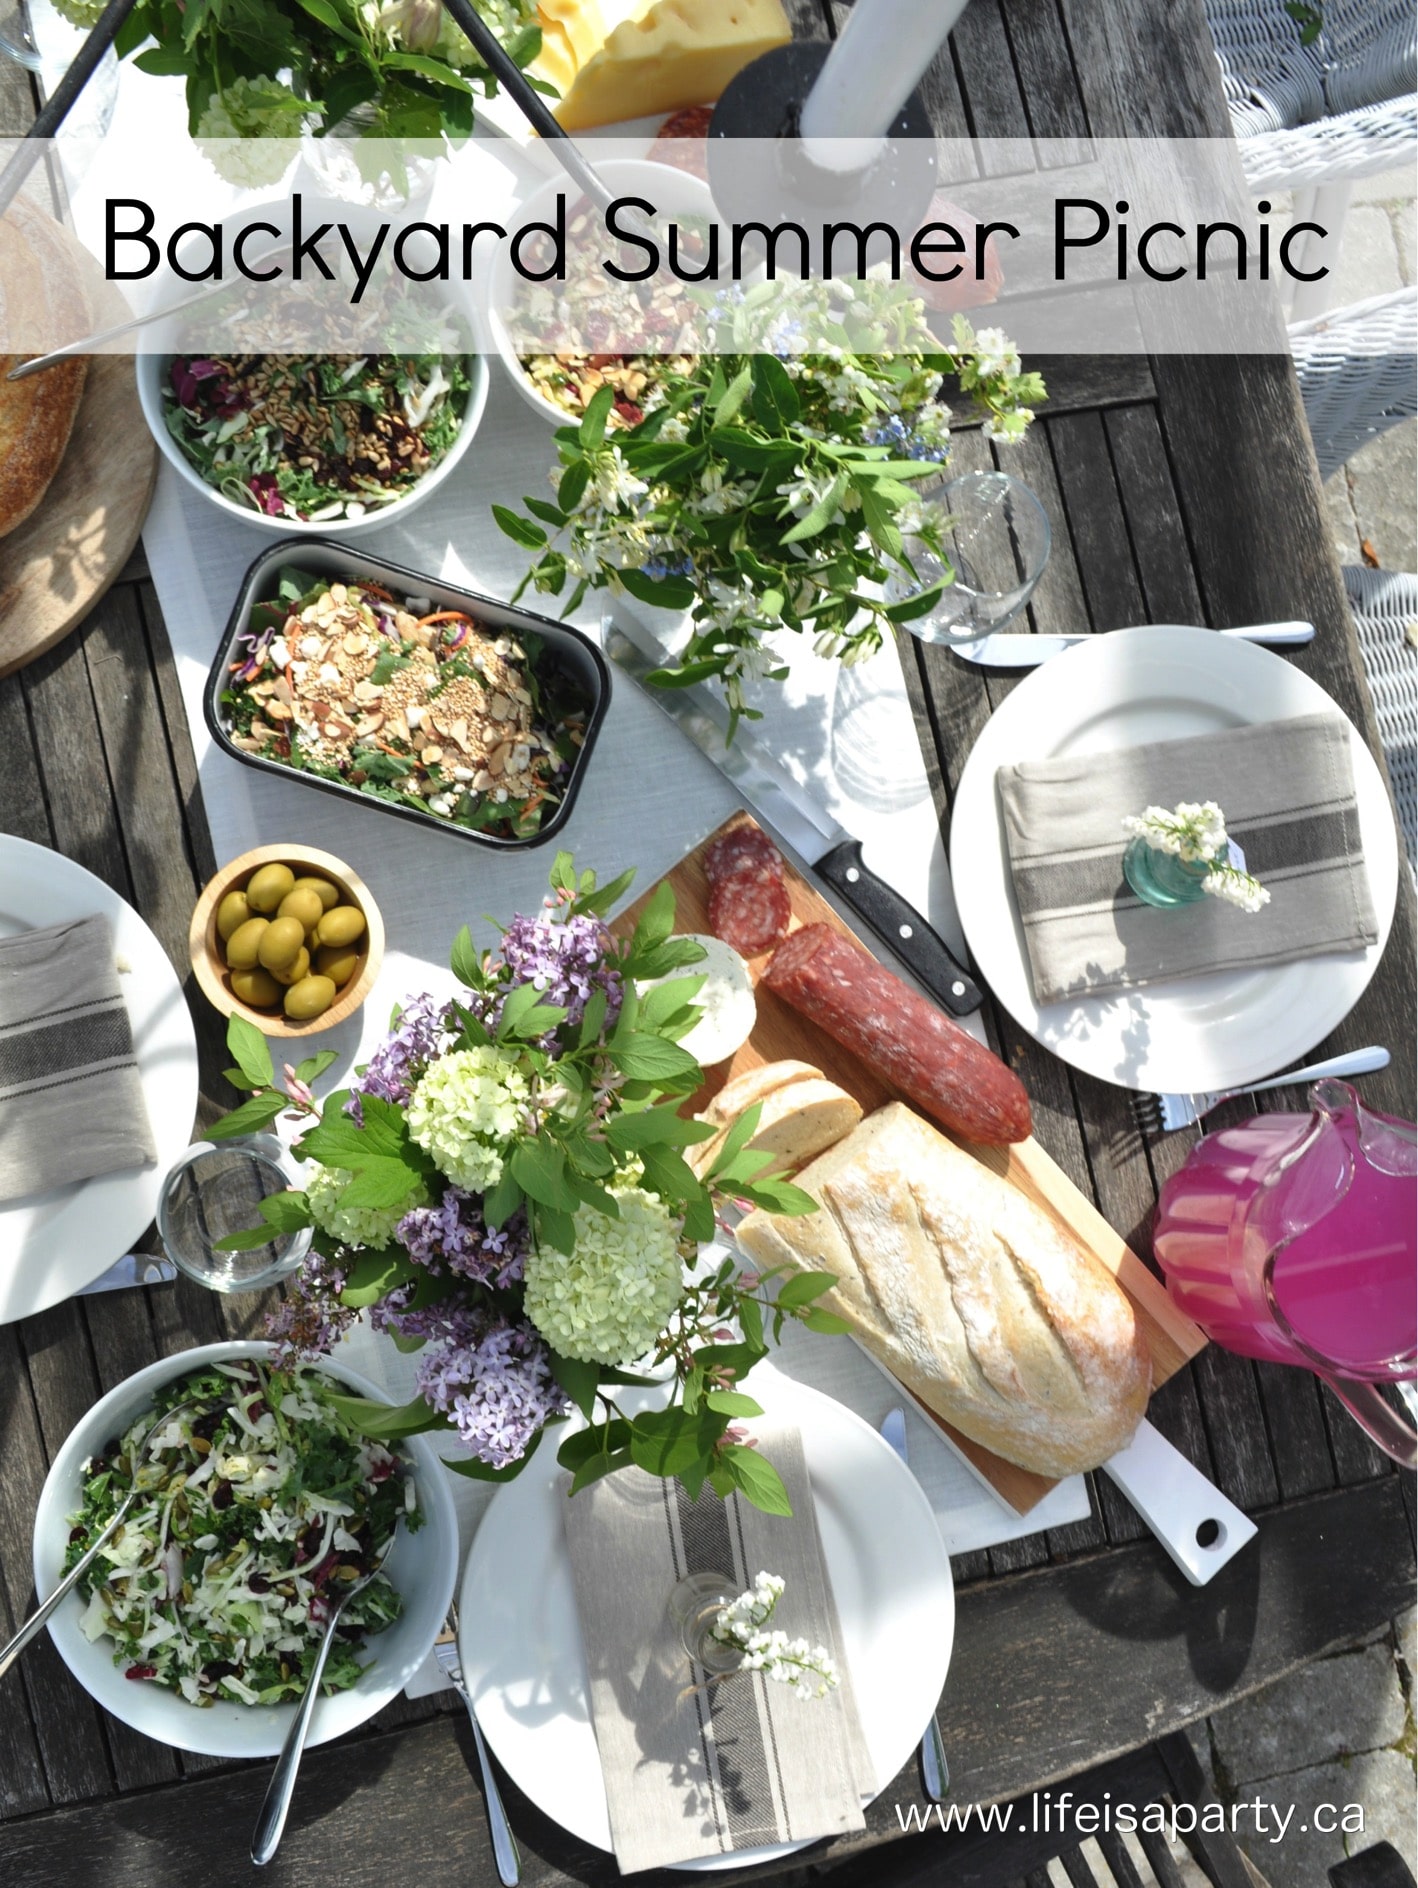 Summer Backyard Picnic -beautiful table setting ideas with lily of the valley placecards, and mason jar flower arrangements and an easy, no fuss menu.